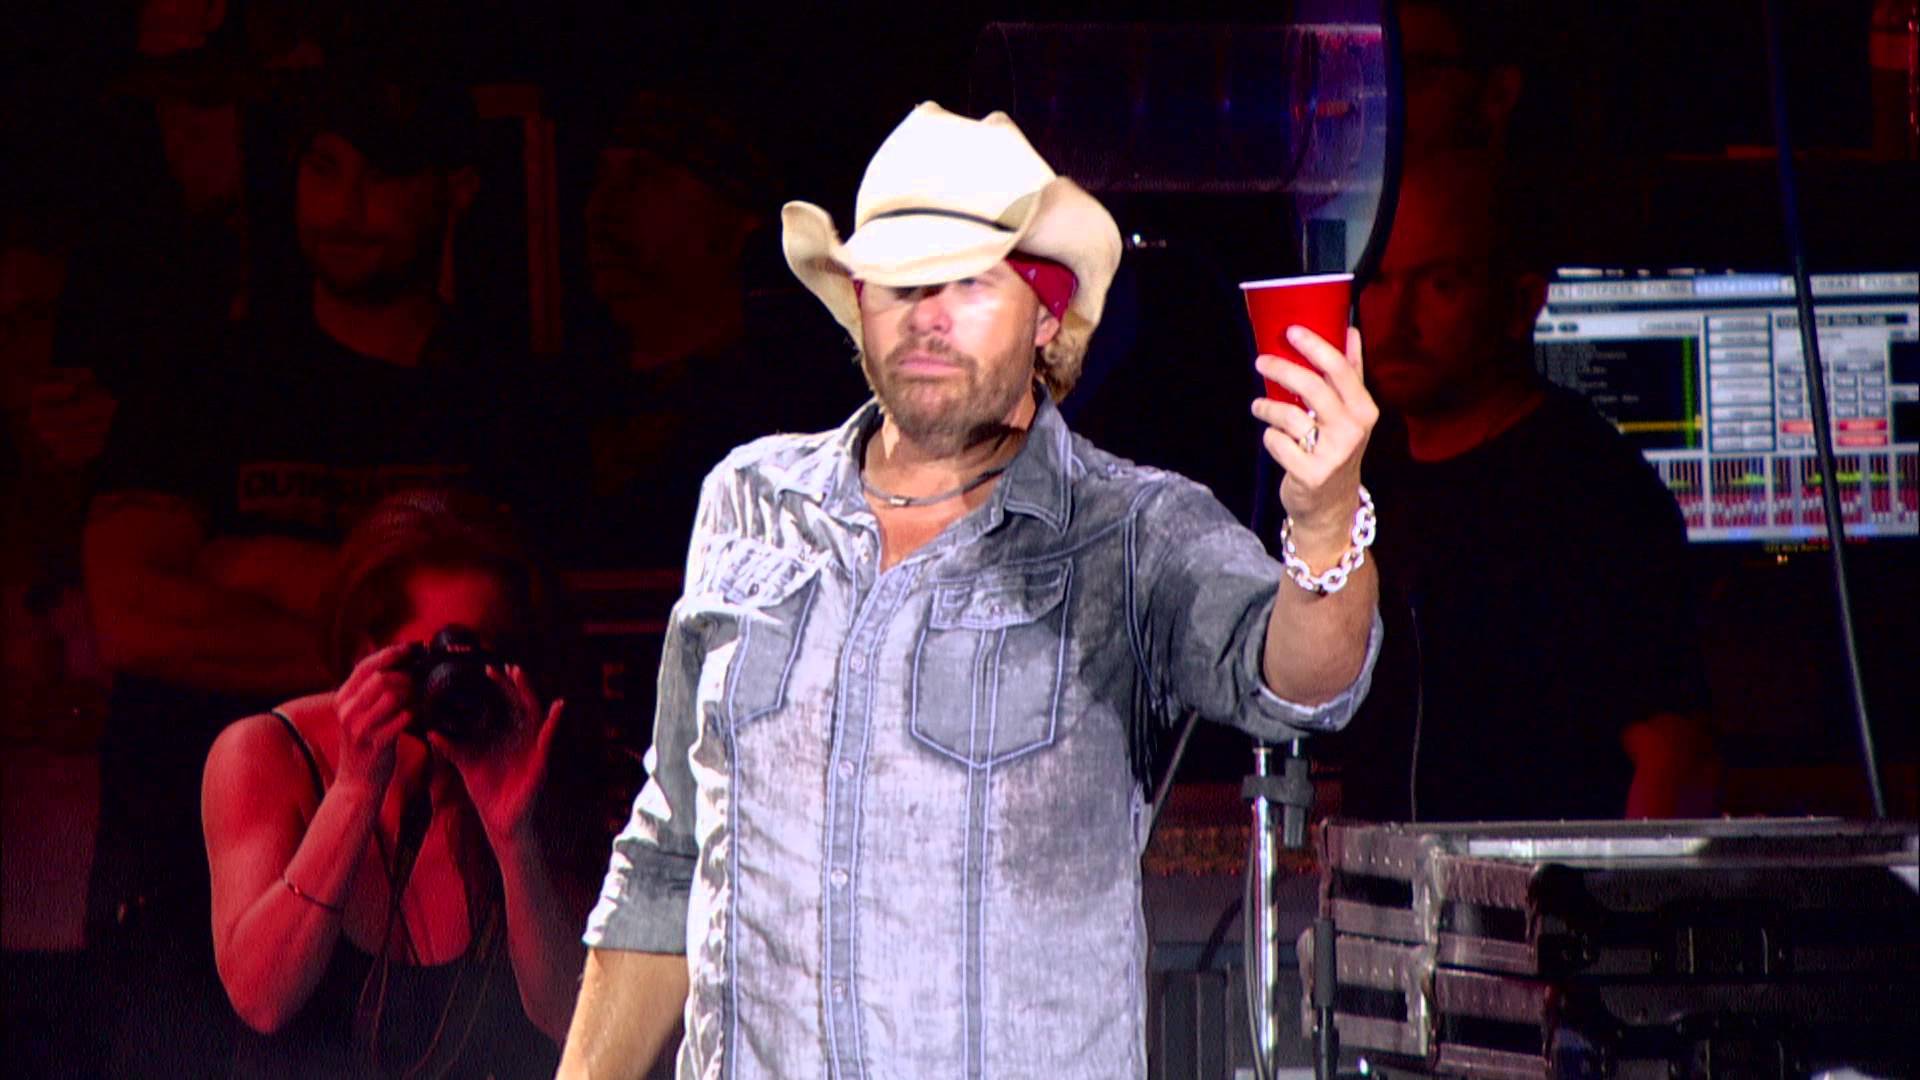 Toby Keith Announces “That’s Country Bro! Tour” 2019 Dates